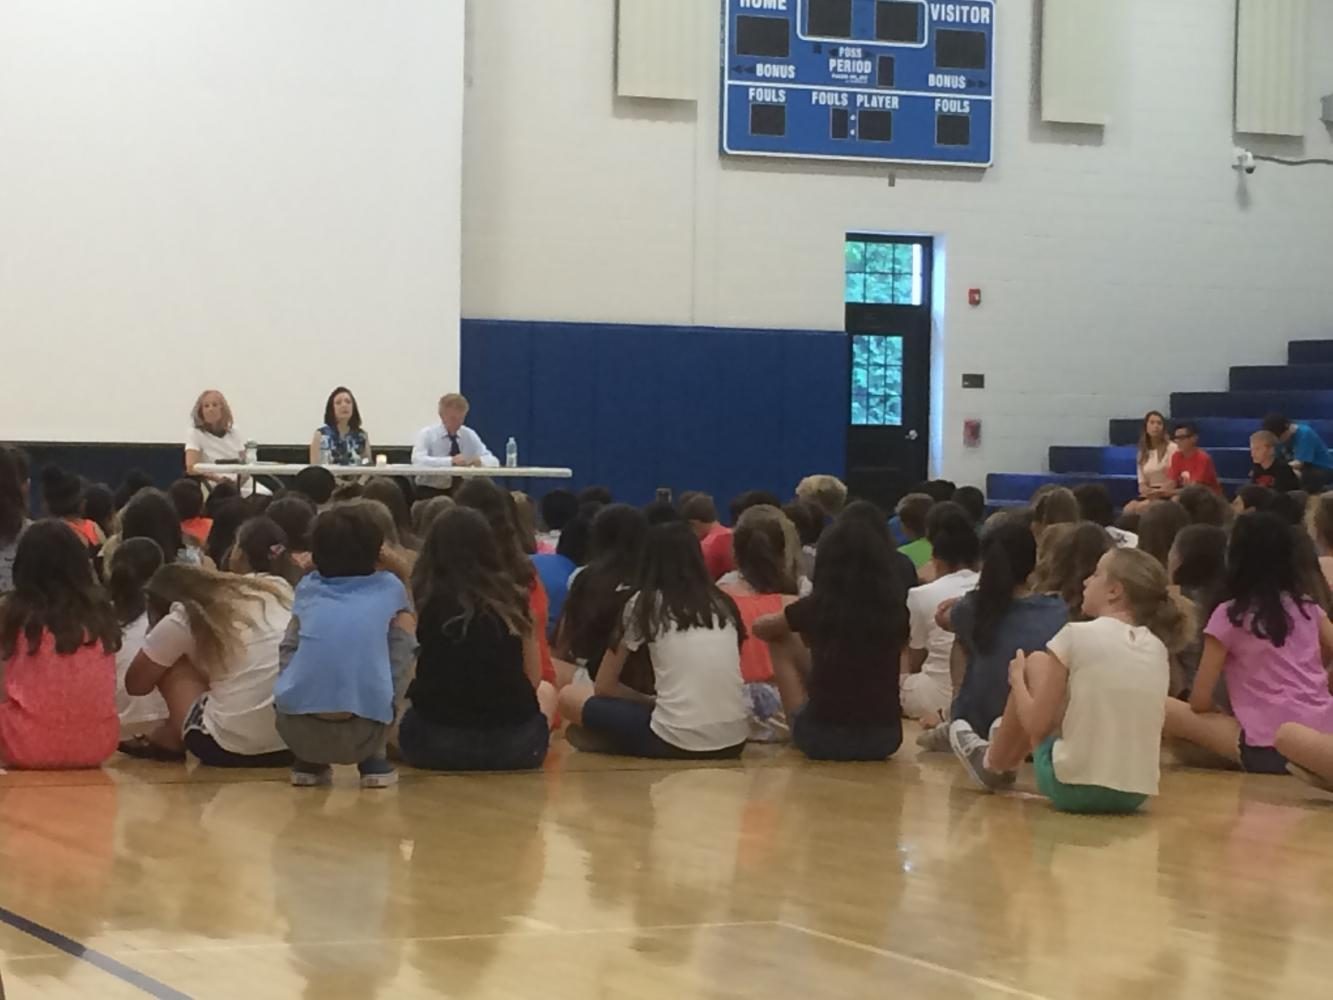 From left to right; Vera Chapman, Barbara Wind; Michael Zeiger; Students watch survivors discuss the Holocaust in the George Washington Middle School gym. Moments before, a candle was lit to remember victims of the Holocaust.